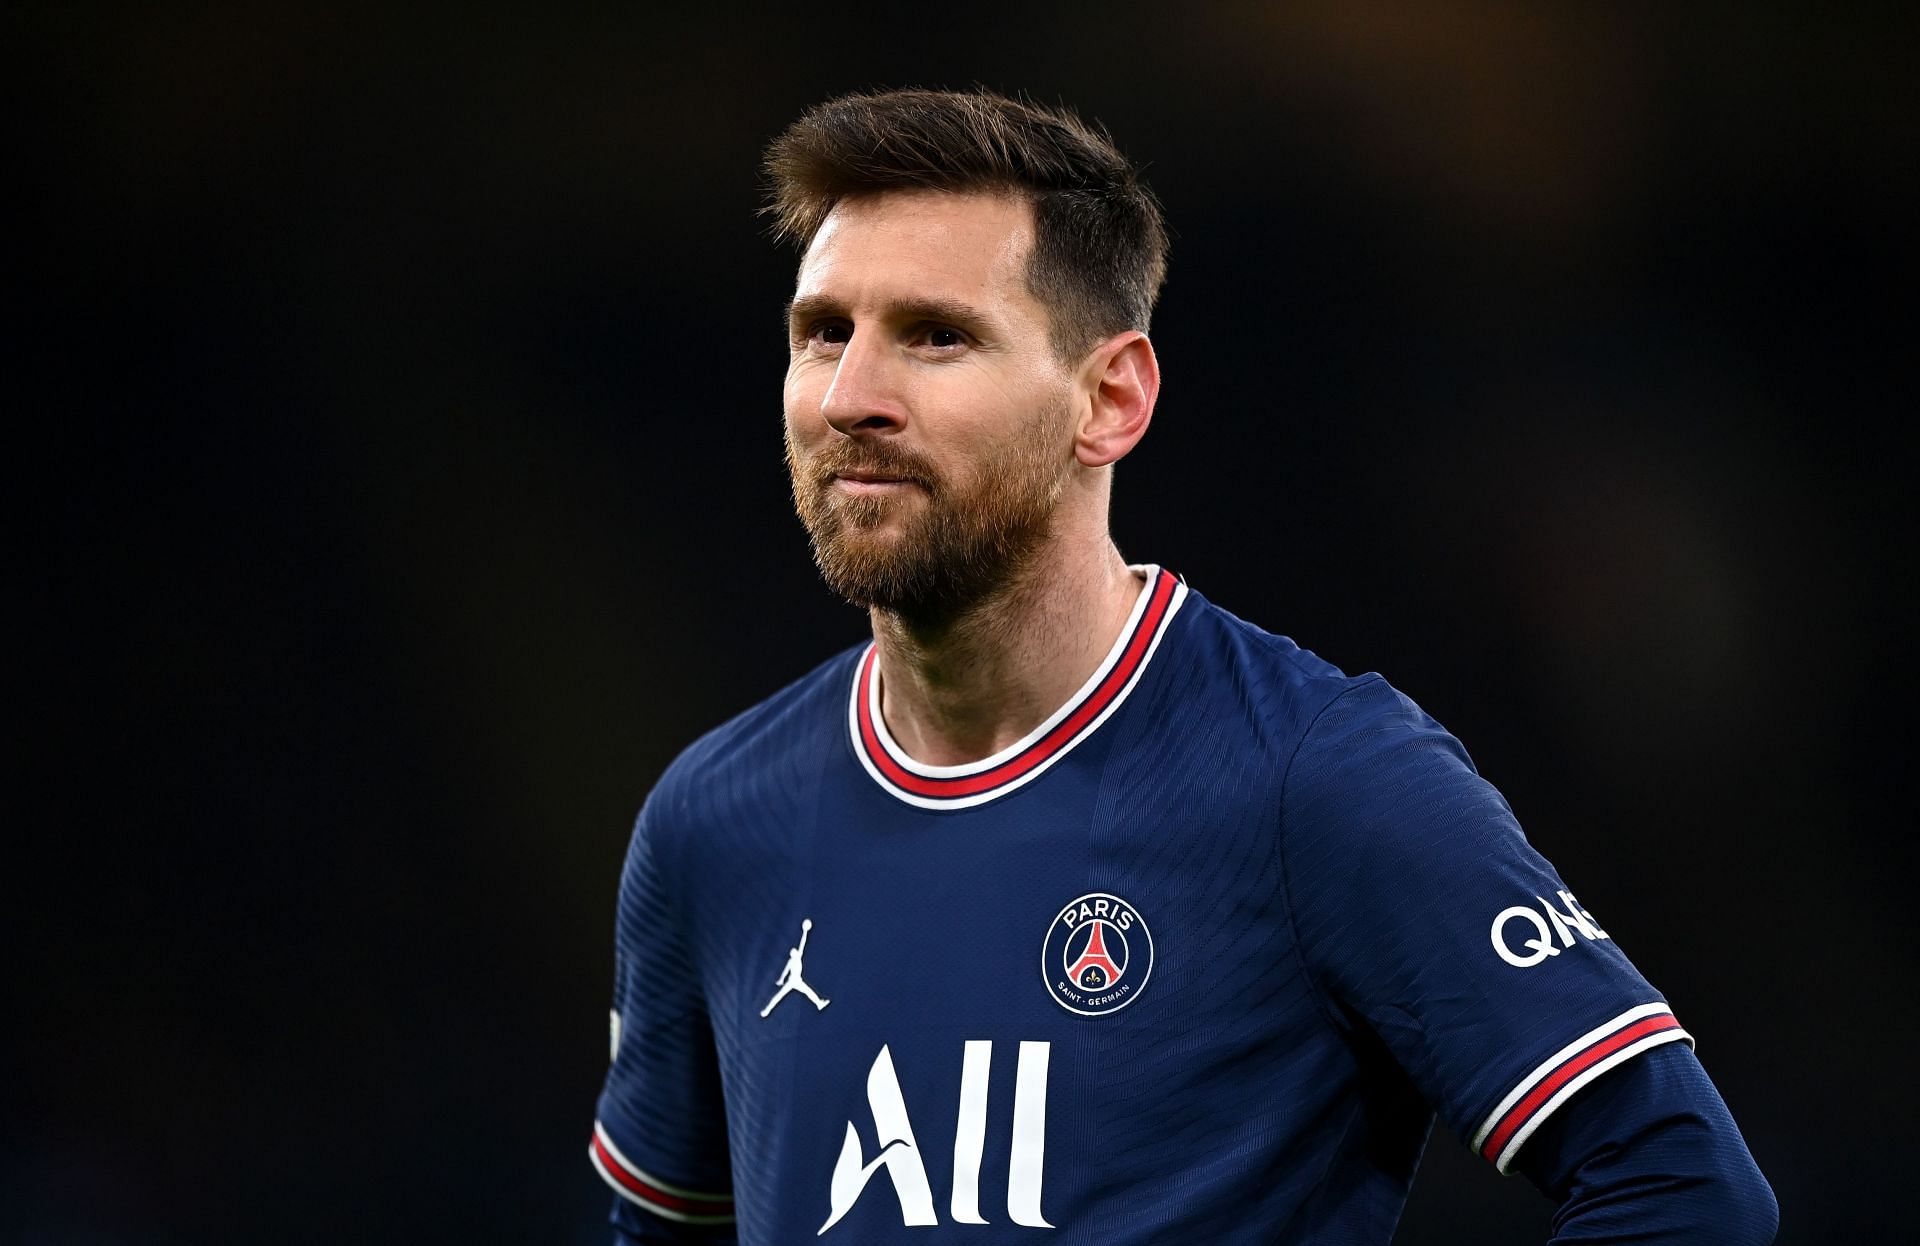 PSG forward Lionel Messi is expected to start against AS Monaco (Photo by Shaun Botterill/Getty Images)